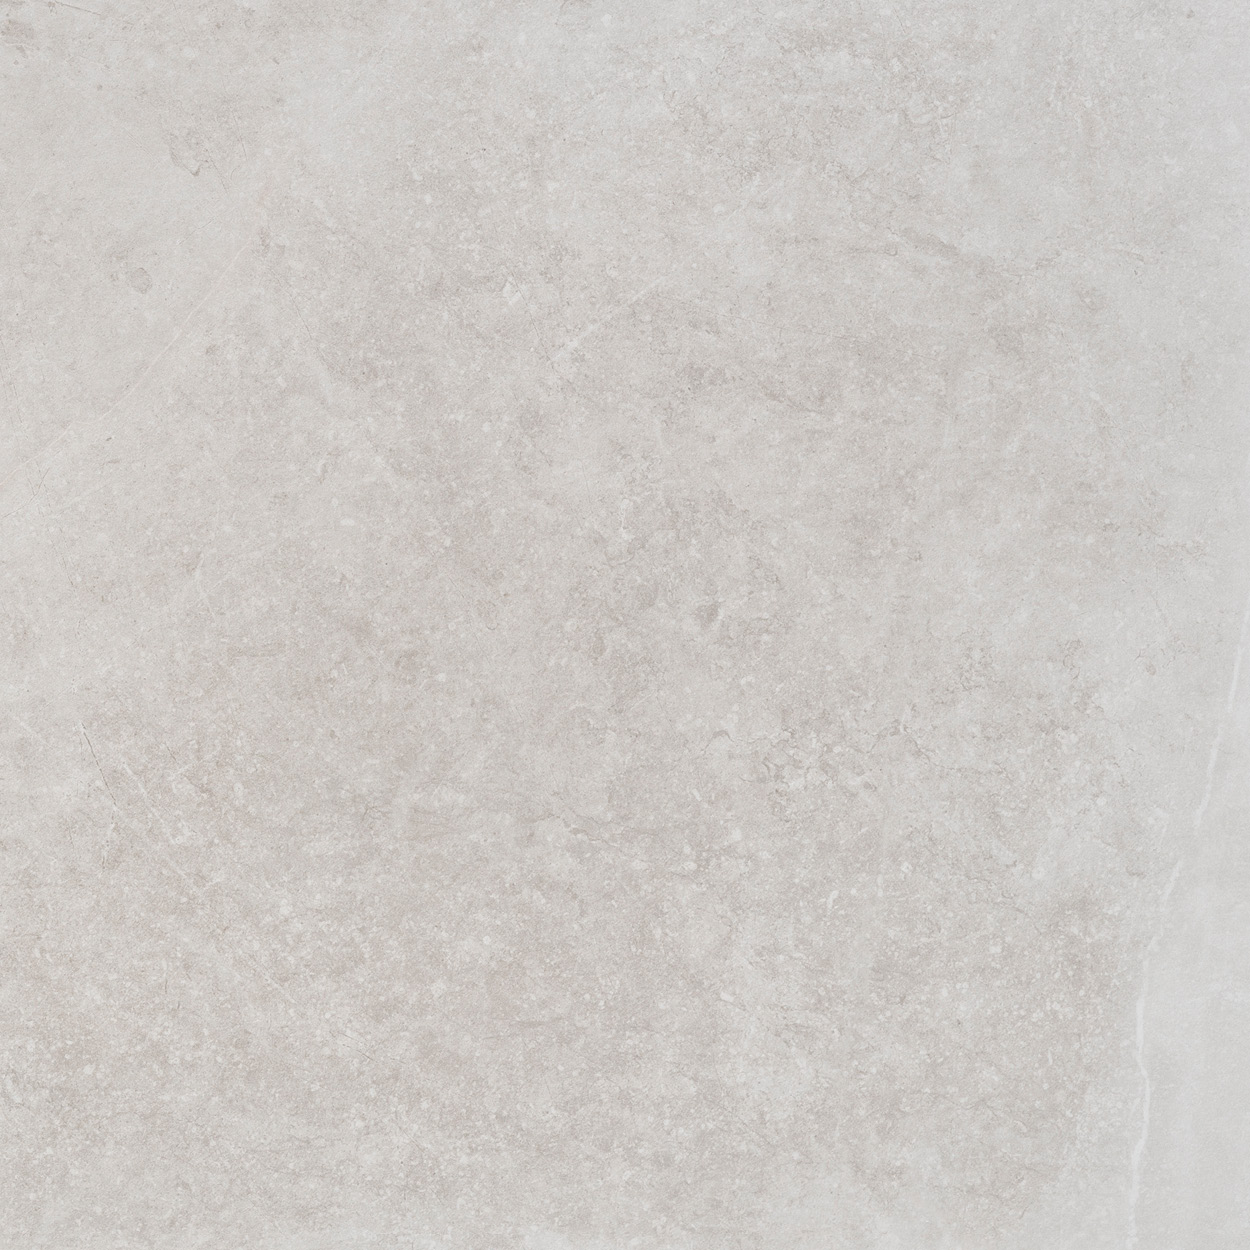 24 x 24 Evo Stone Ivory Honed finished Rectified Porcelain Tile (SPECIAL ORDER ONLY)